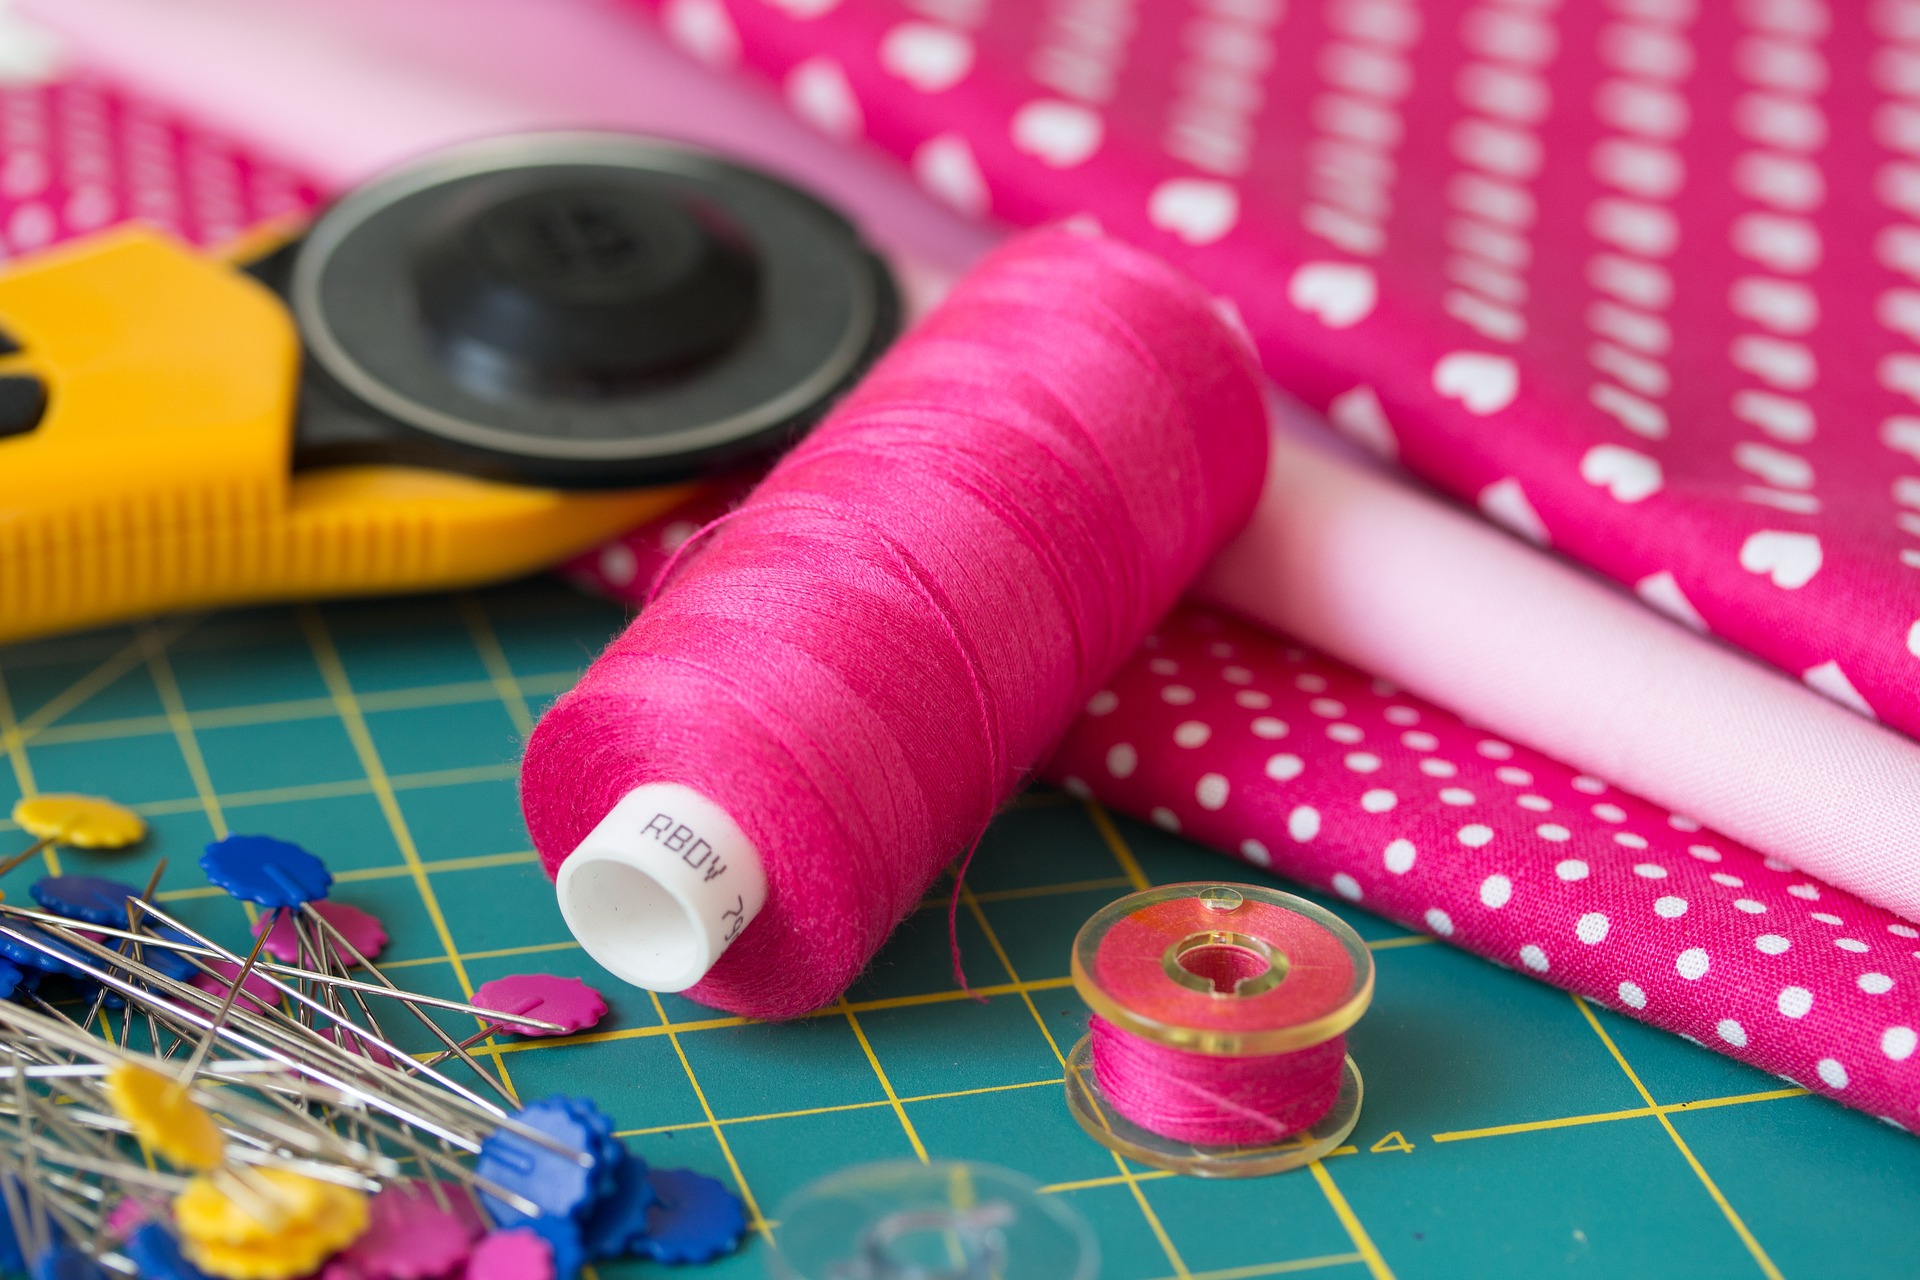 Image of sewing supplies and fabric